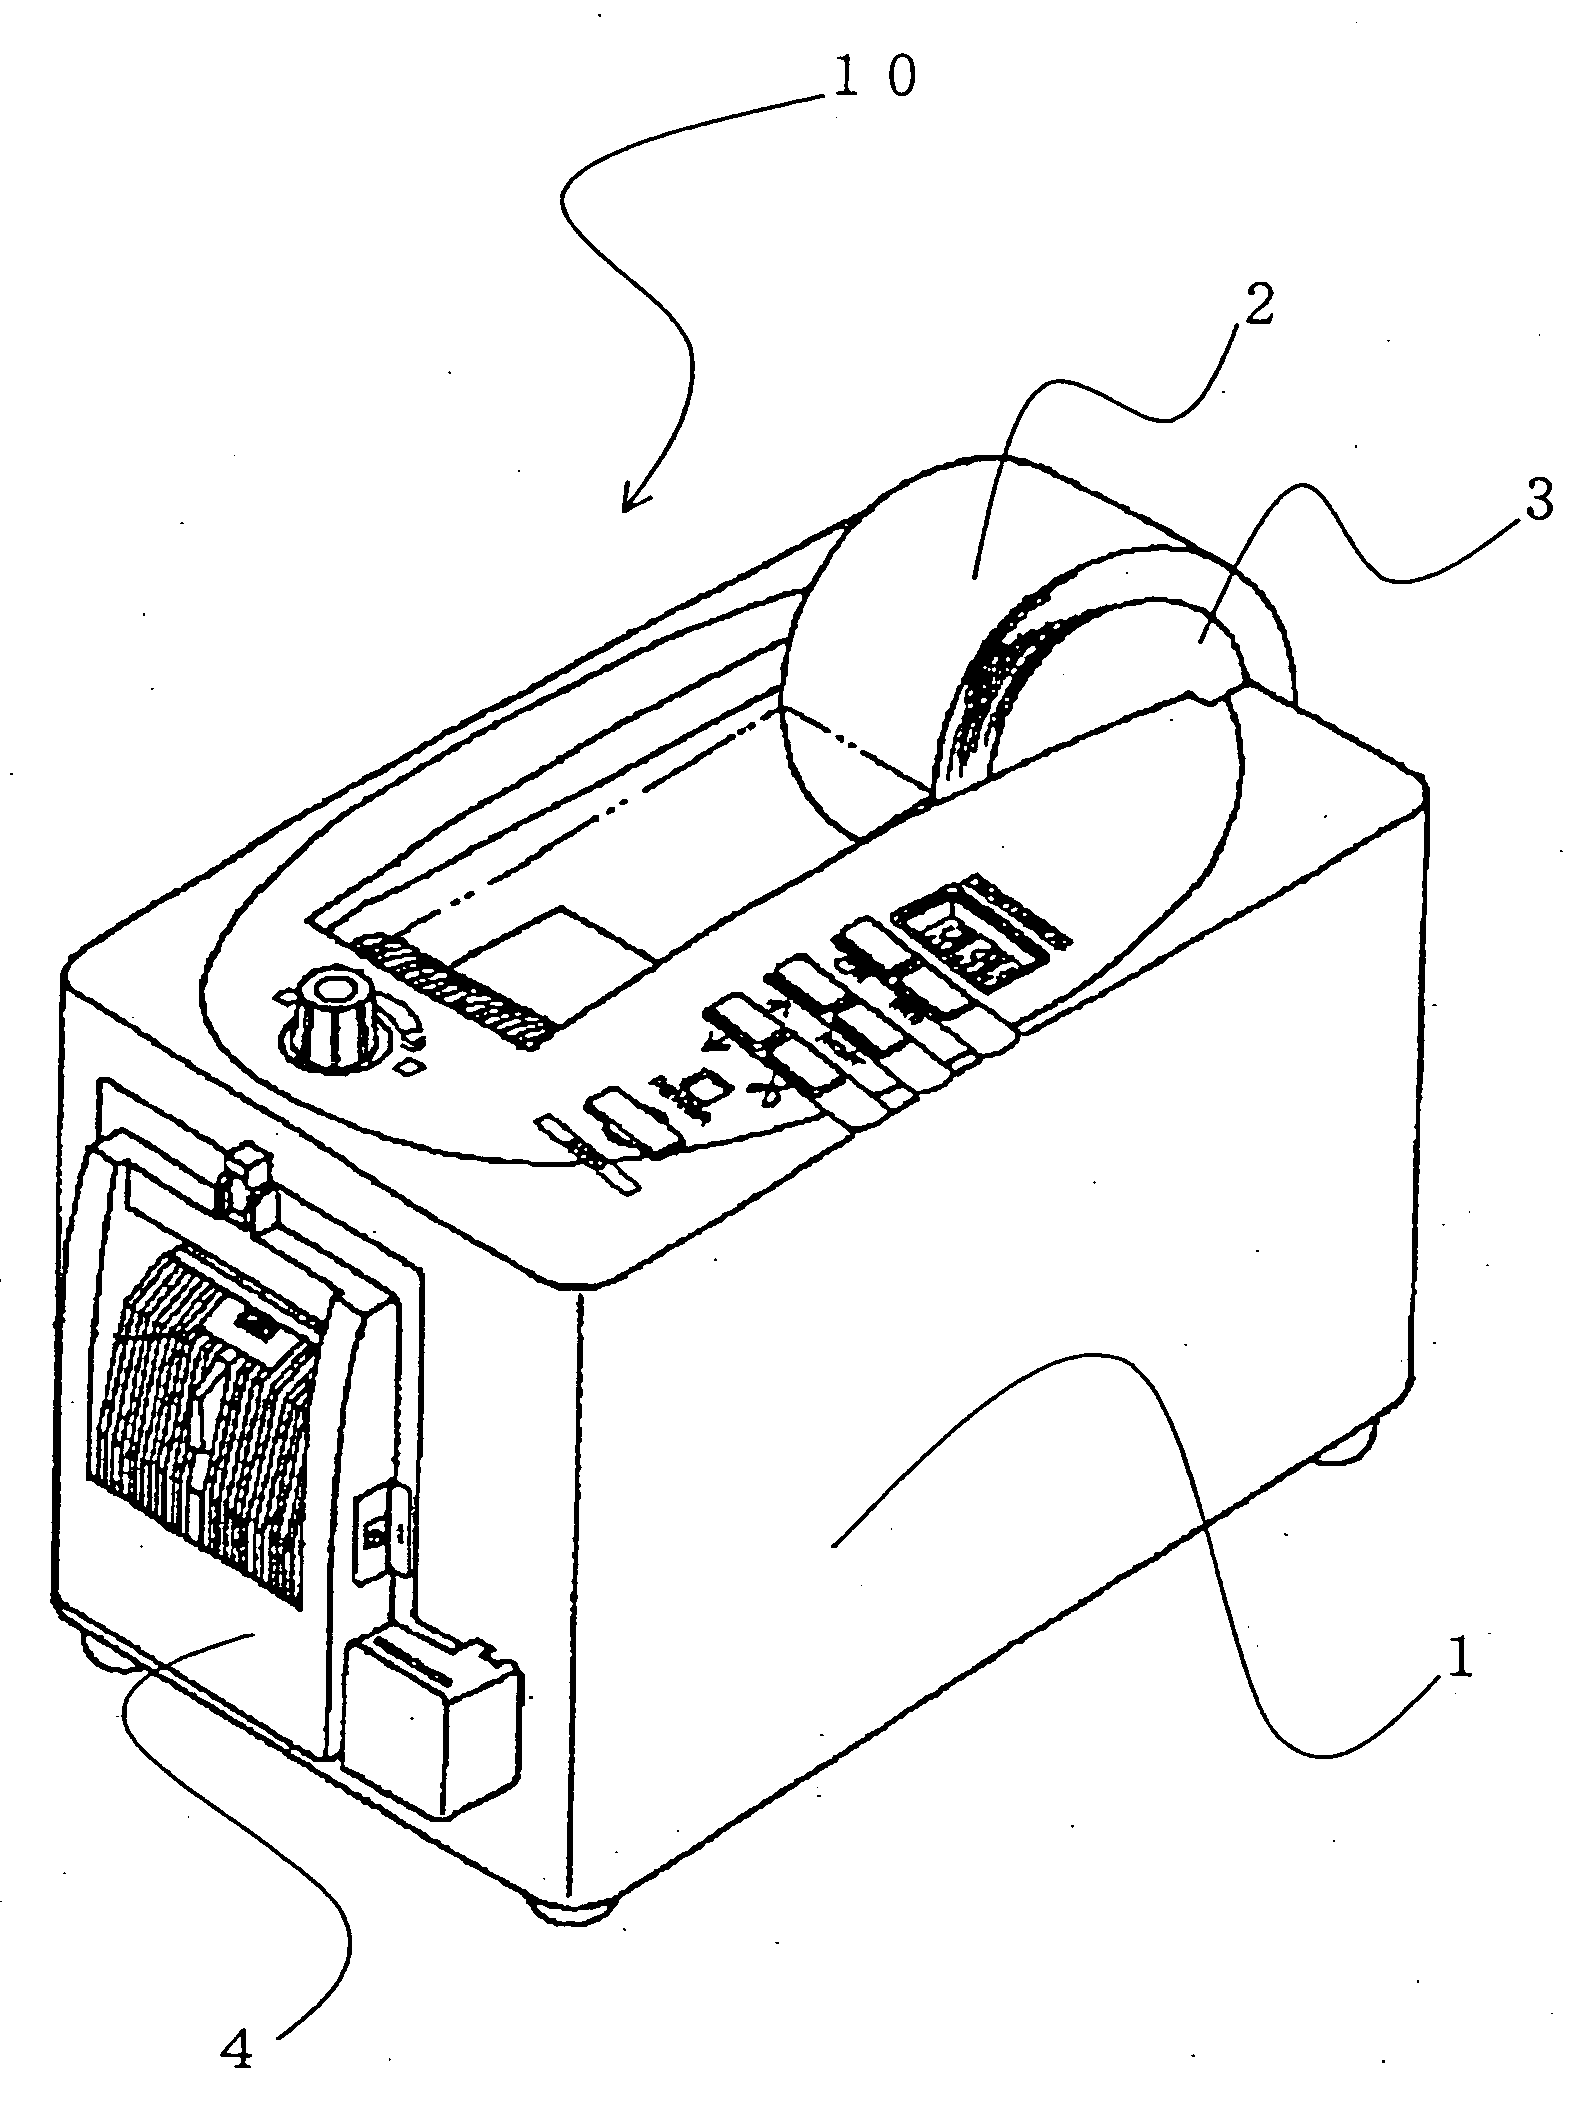 Electrically-driven tape cutter